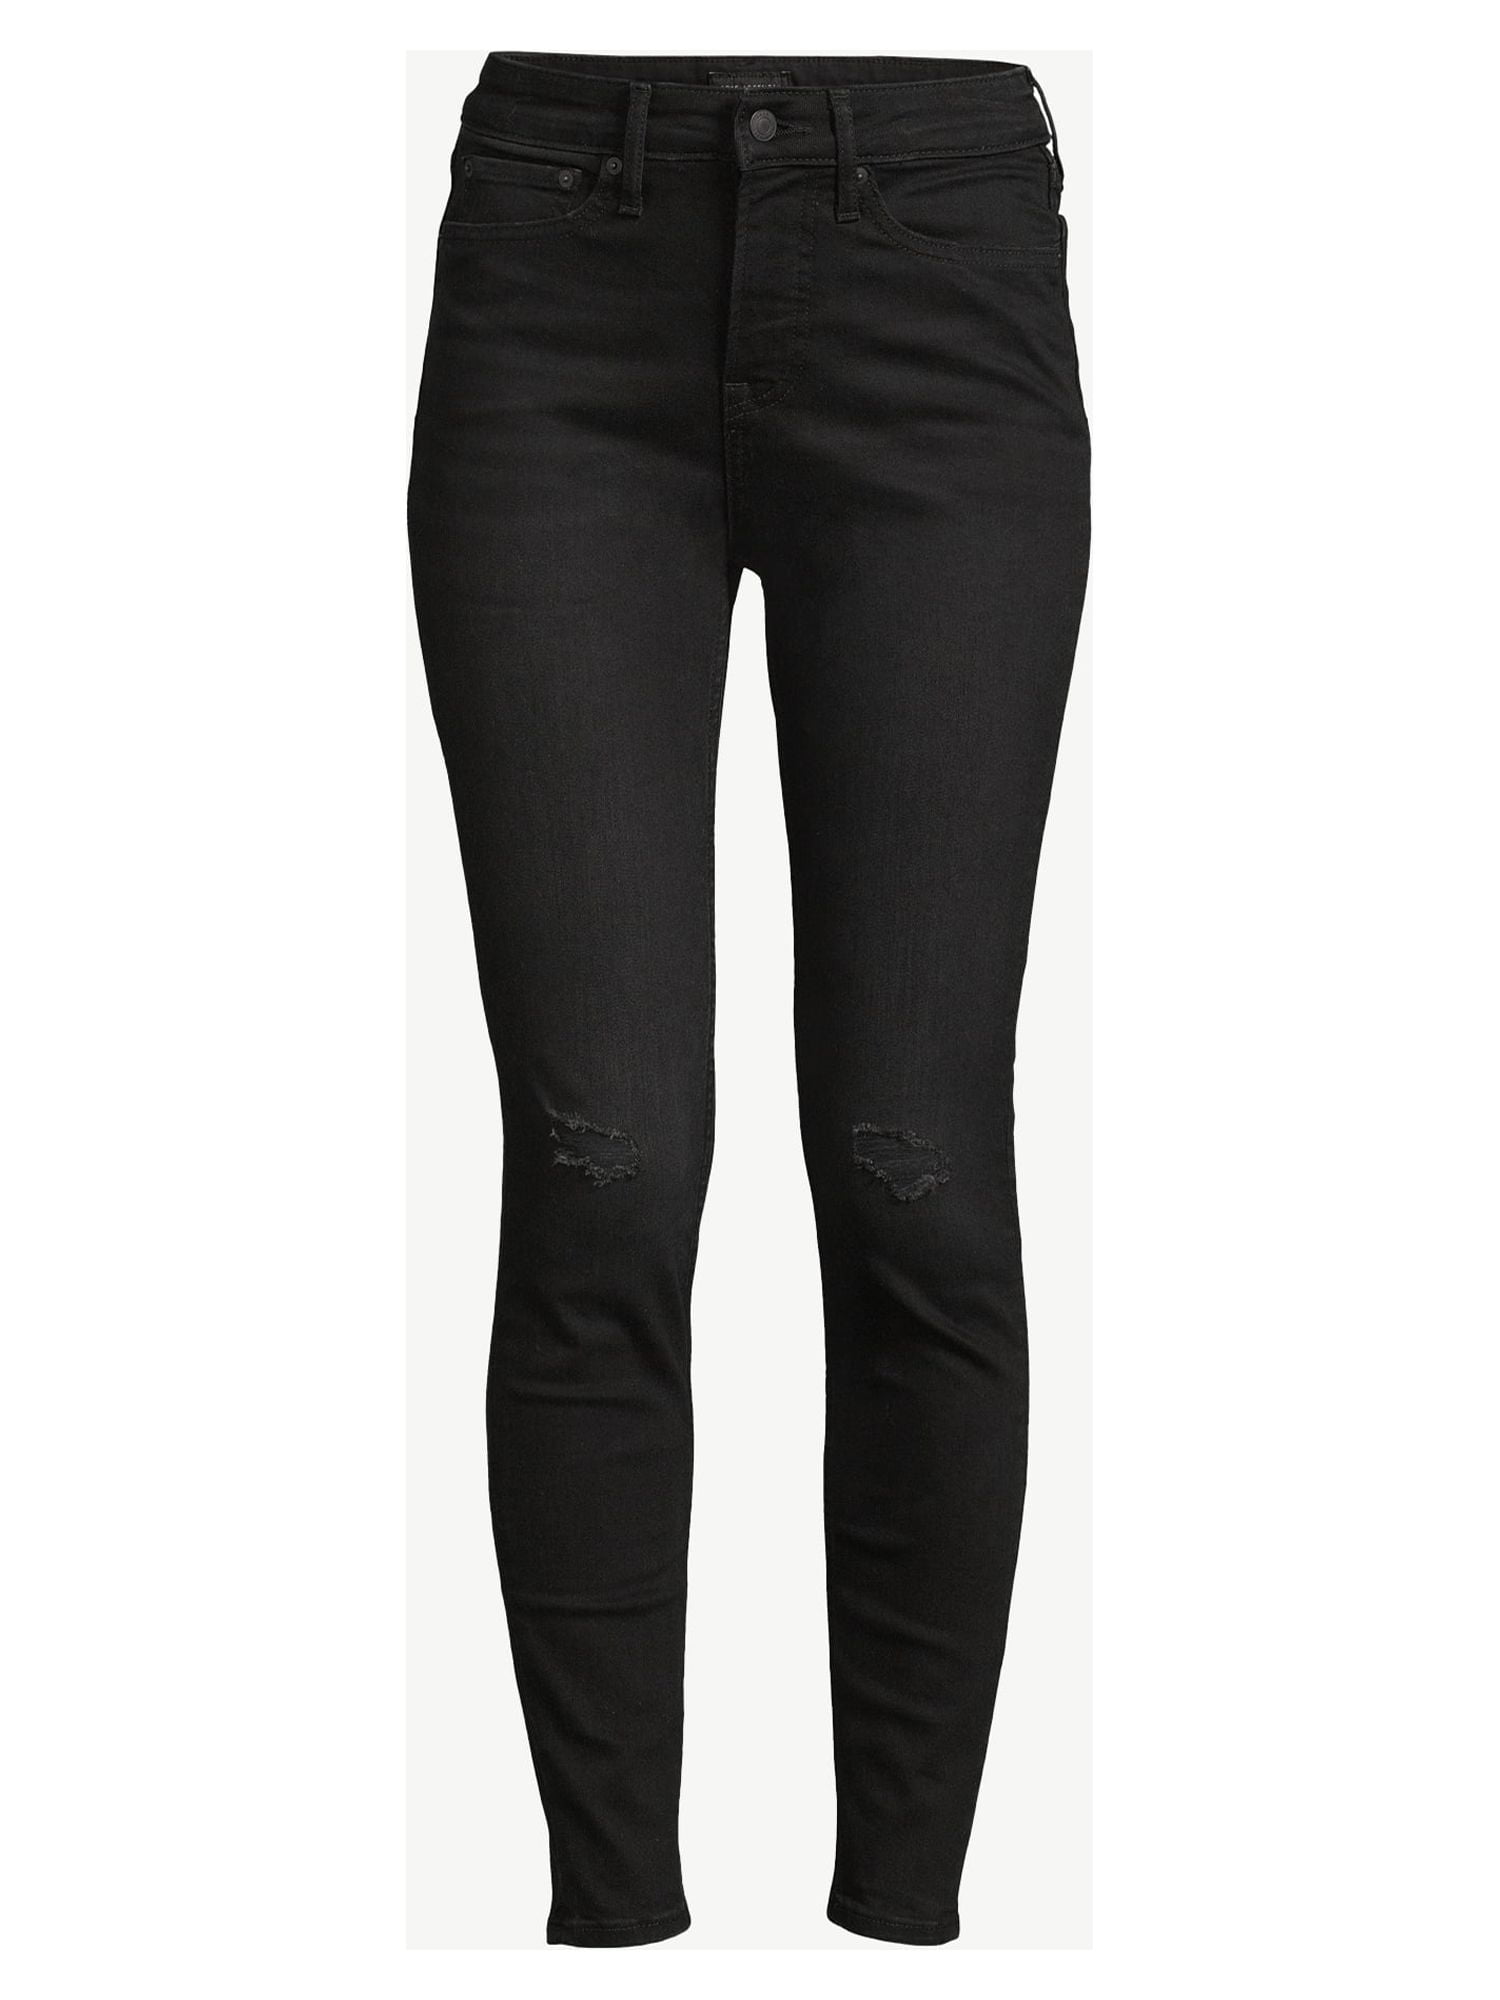 Free Assembly Women's High Rise Skinny Jeans 